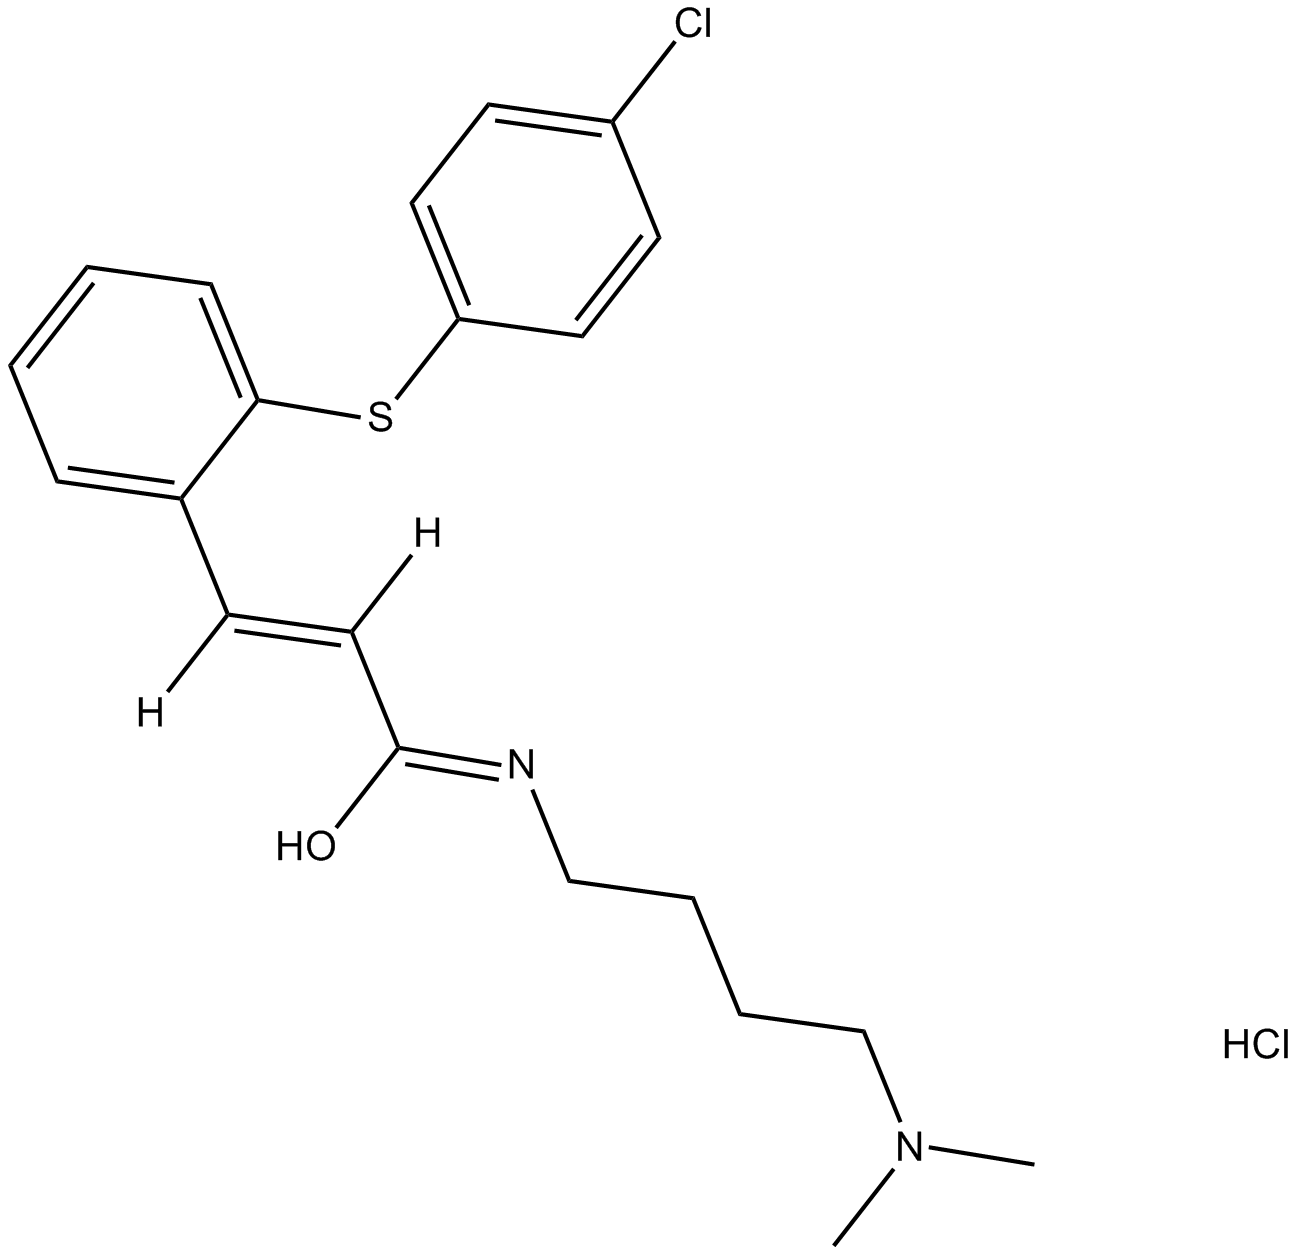 A 350619 hydrochloride  Chemical Structure